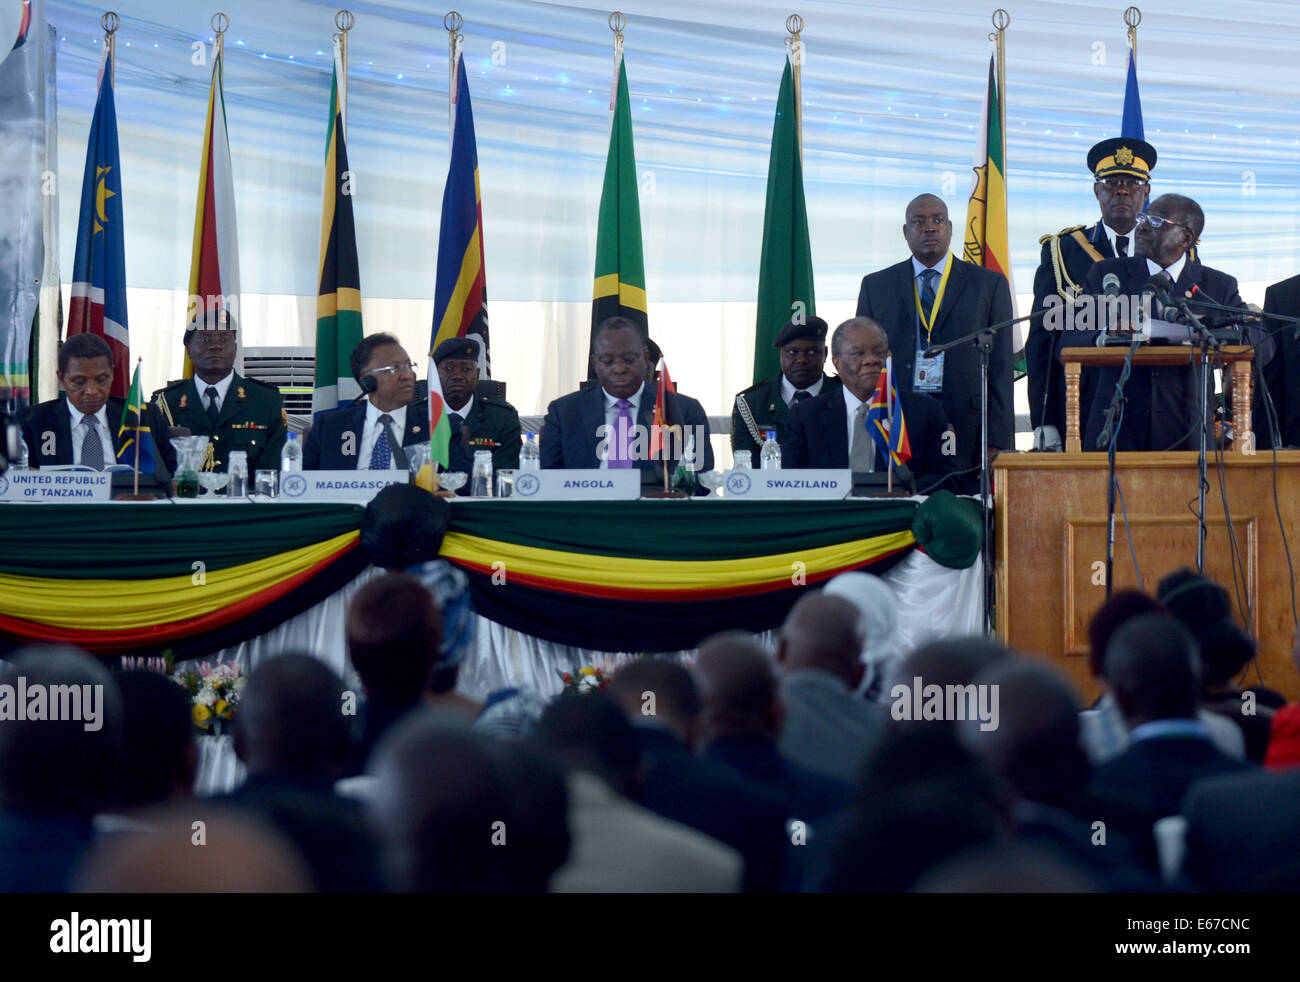 (140817) -- VICTORIA FALLS, Aug. 17, 2014 (Xinhua) -- Zimbabwean President Robert Mugabe speaks during the 34th Summit of the Southern African Development Community (SADC) Heads of States and Government in Victoria Falls, north Zimbabwe, Aug. 17, 2014. The meeting opened here Sunday.(Xinhua/Wang Bo) (dzl) Stock Photo